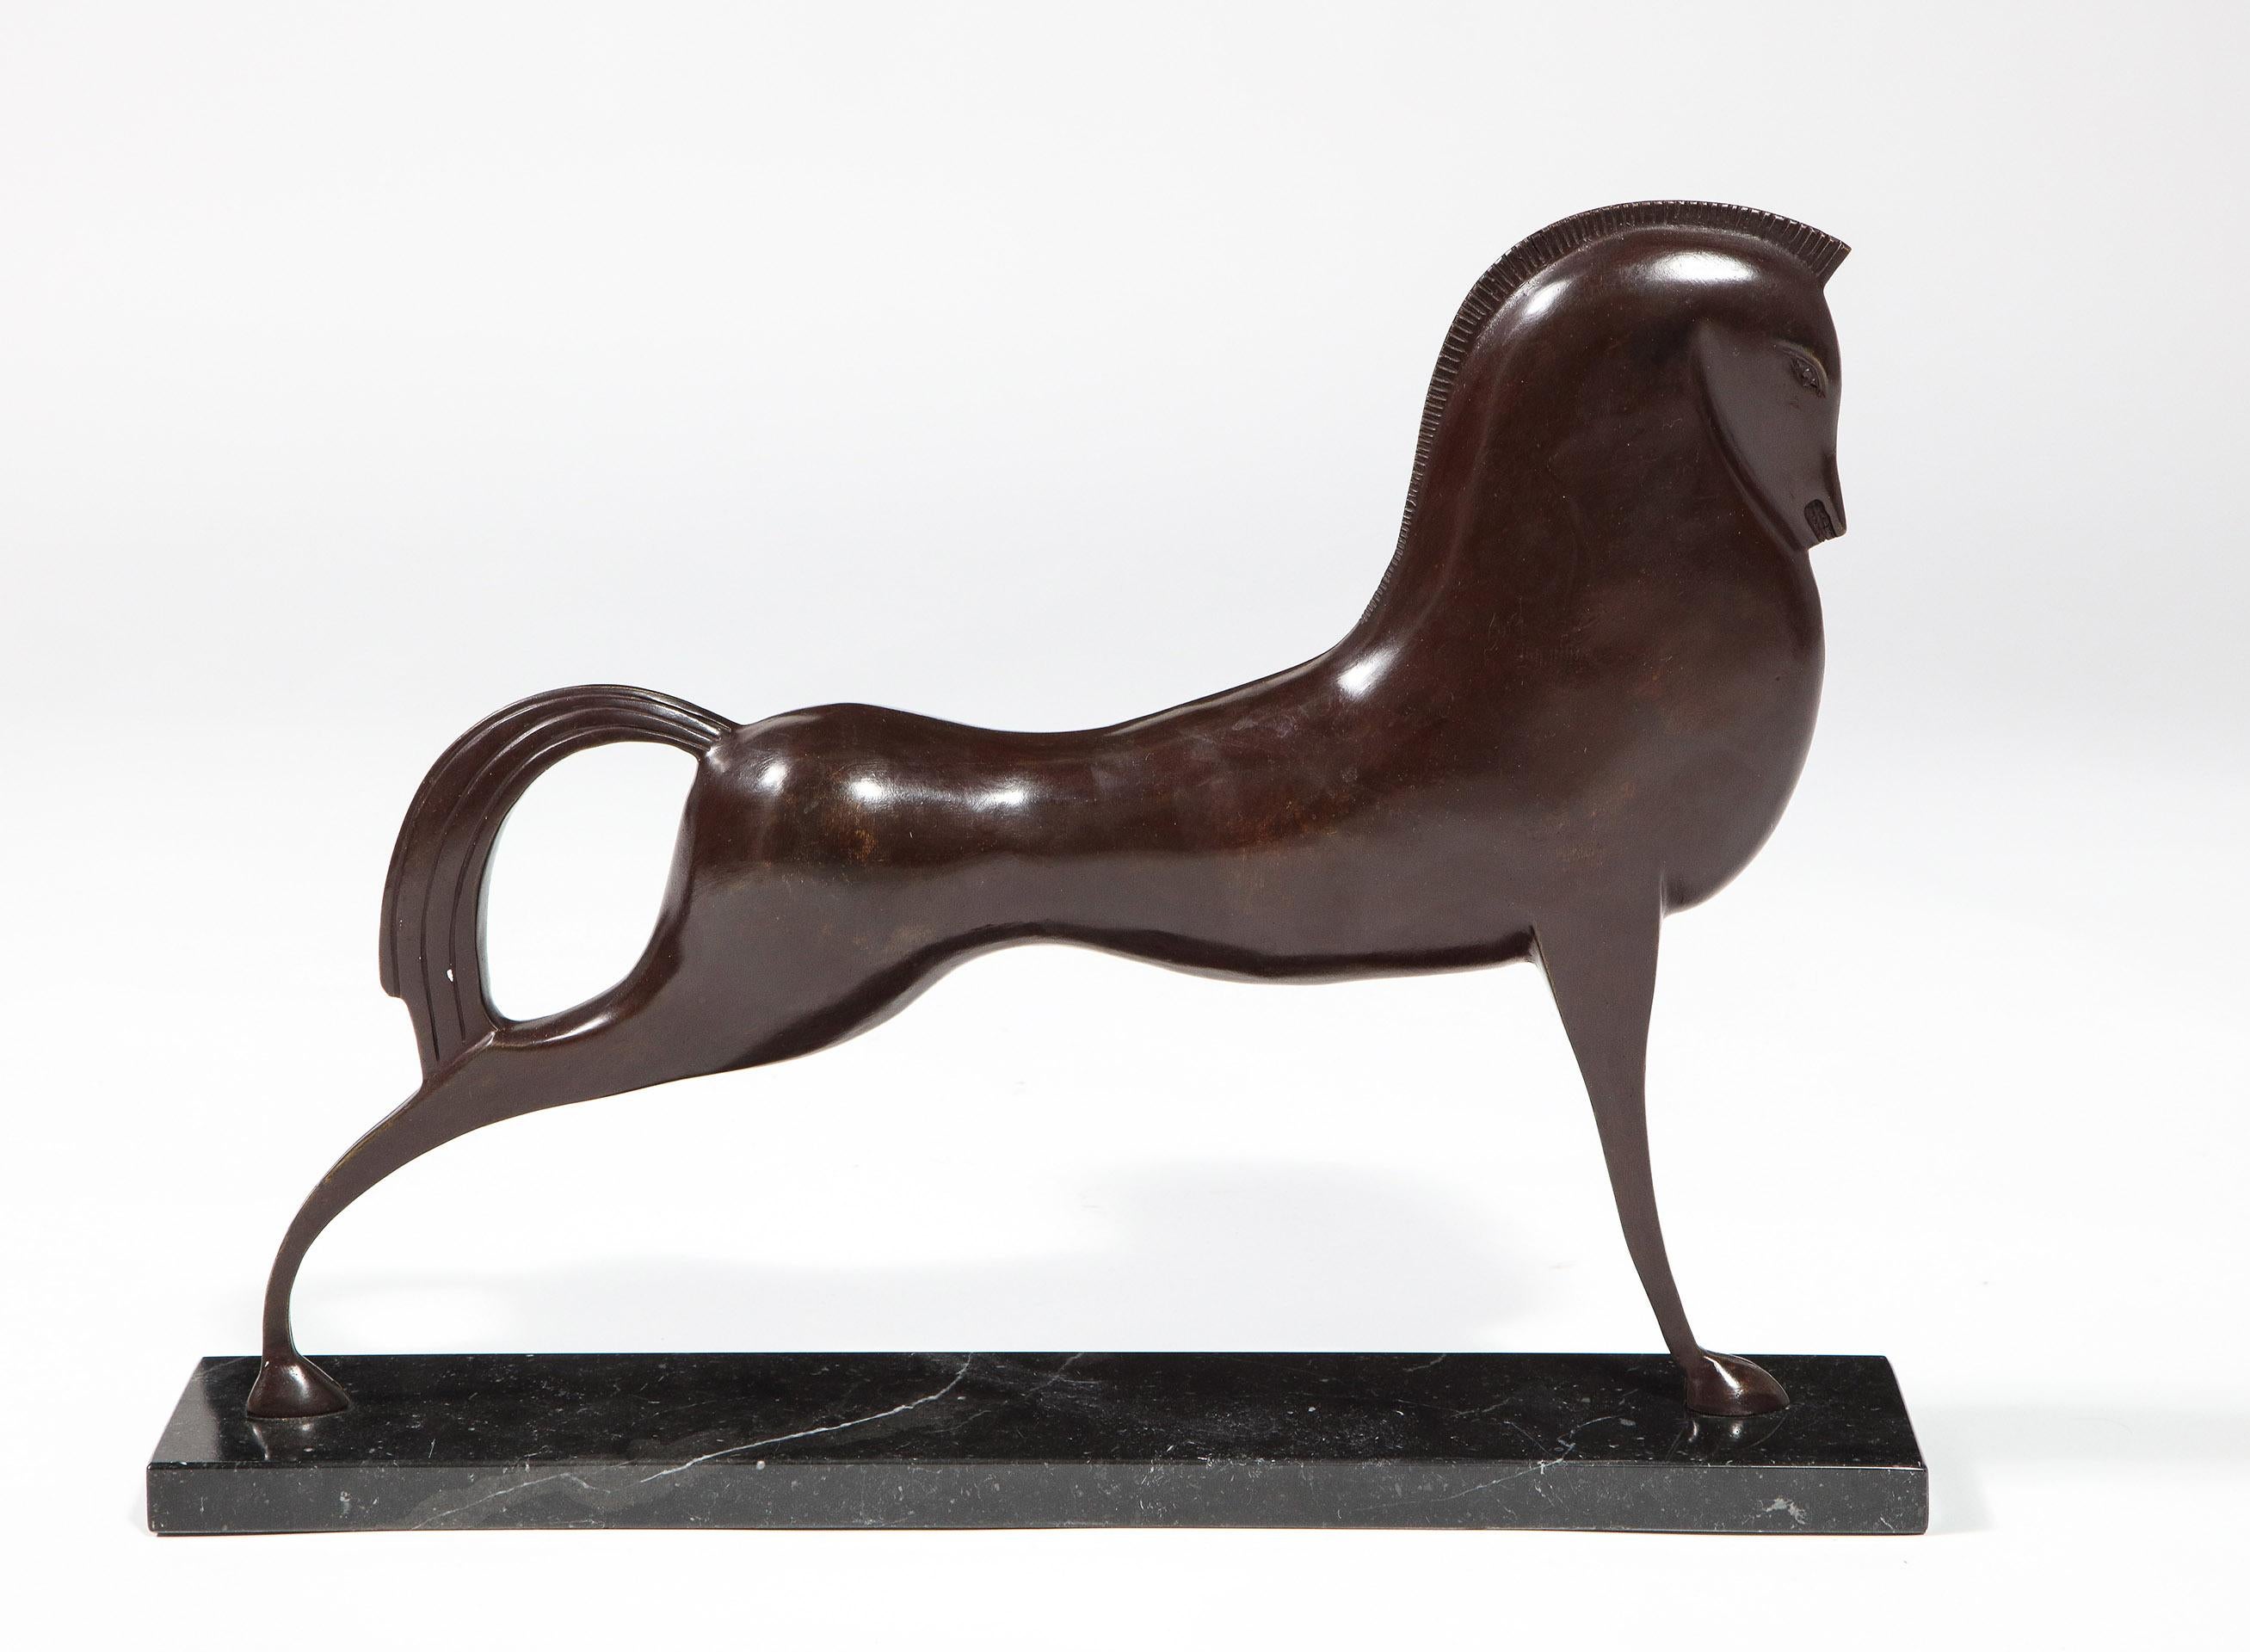 20th Century Bronze Sculpture of a Horse in a Classical Greek Style